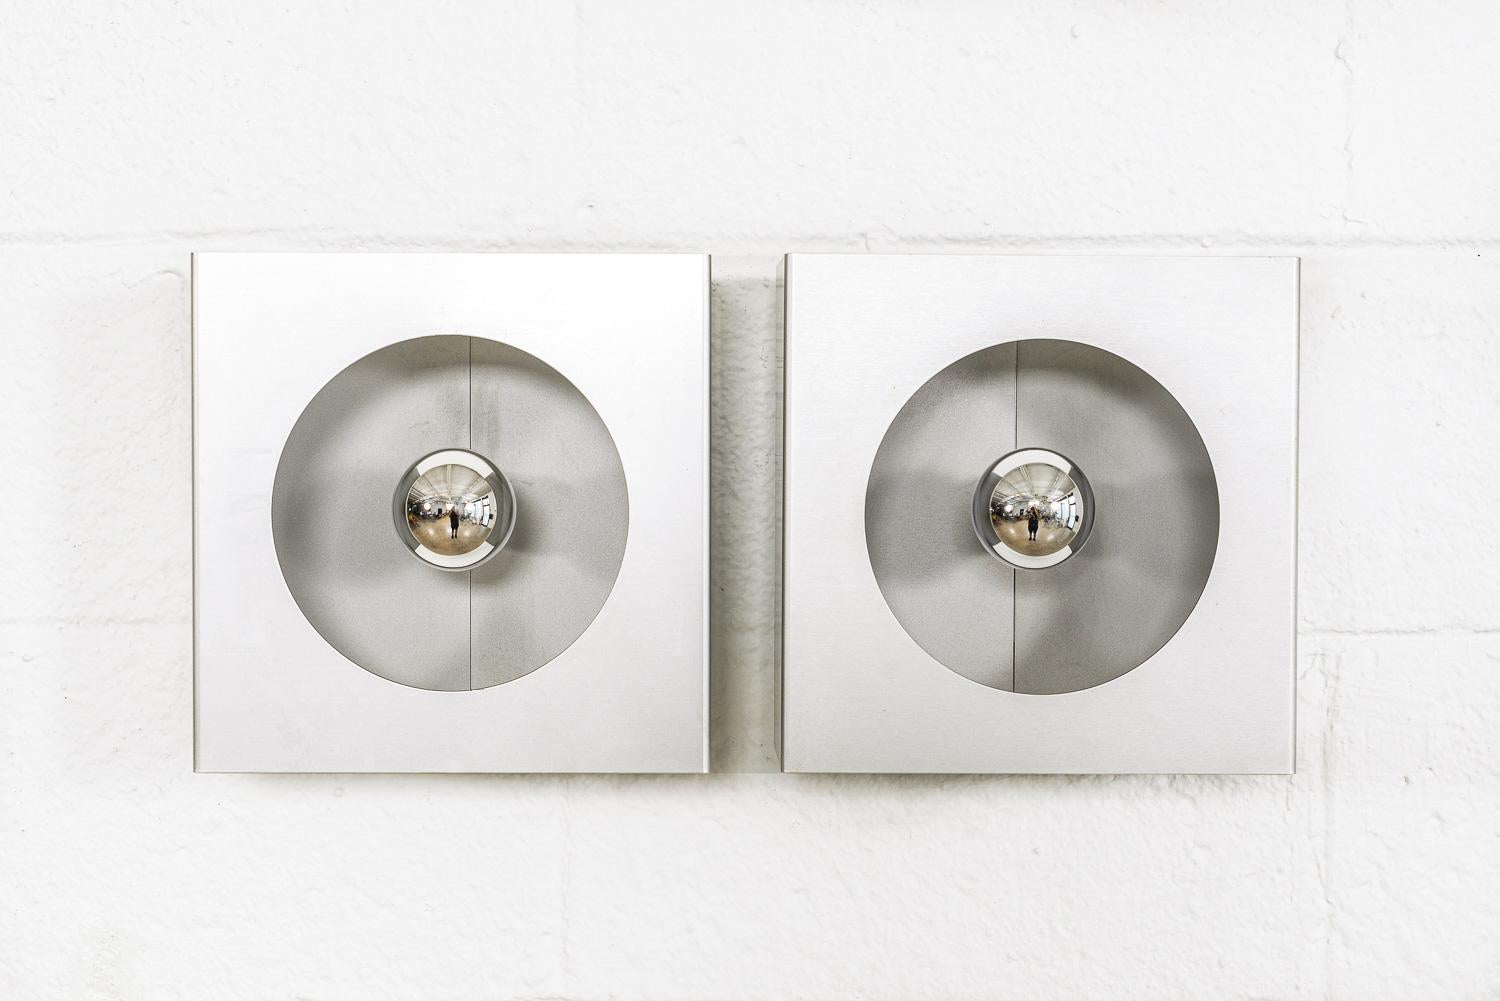 This rare pair of vintage midcentury French modern Model 2091 Disderot wall sconces were made in France in 1968. Well-crafted of heavy folded anodized aluminum in a matte silver finish, the unique space age, modernist design is meant to appear to